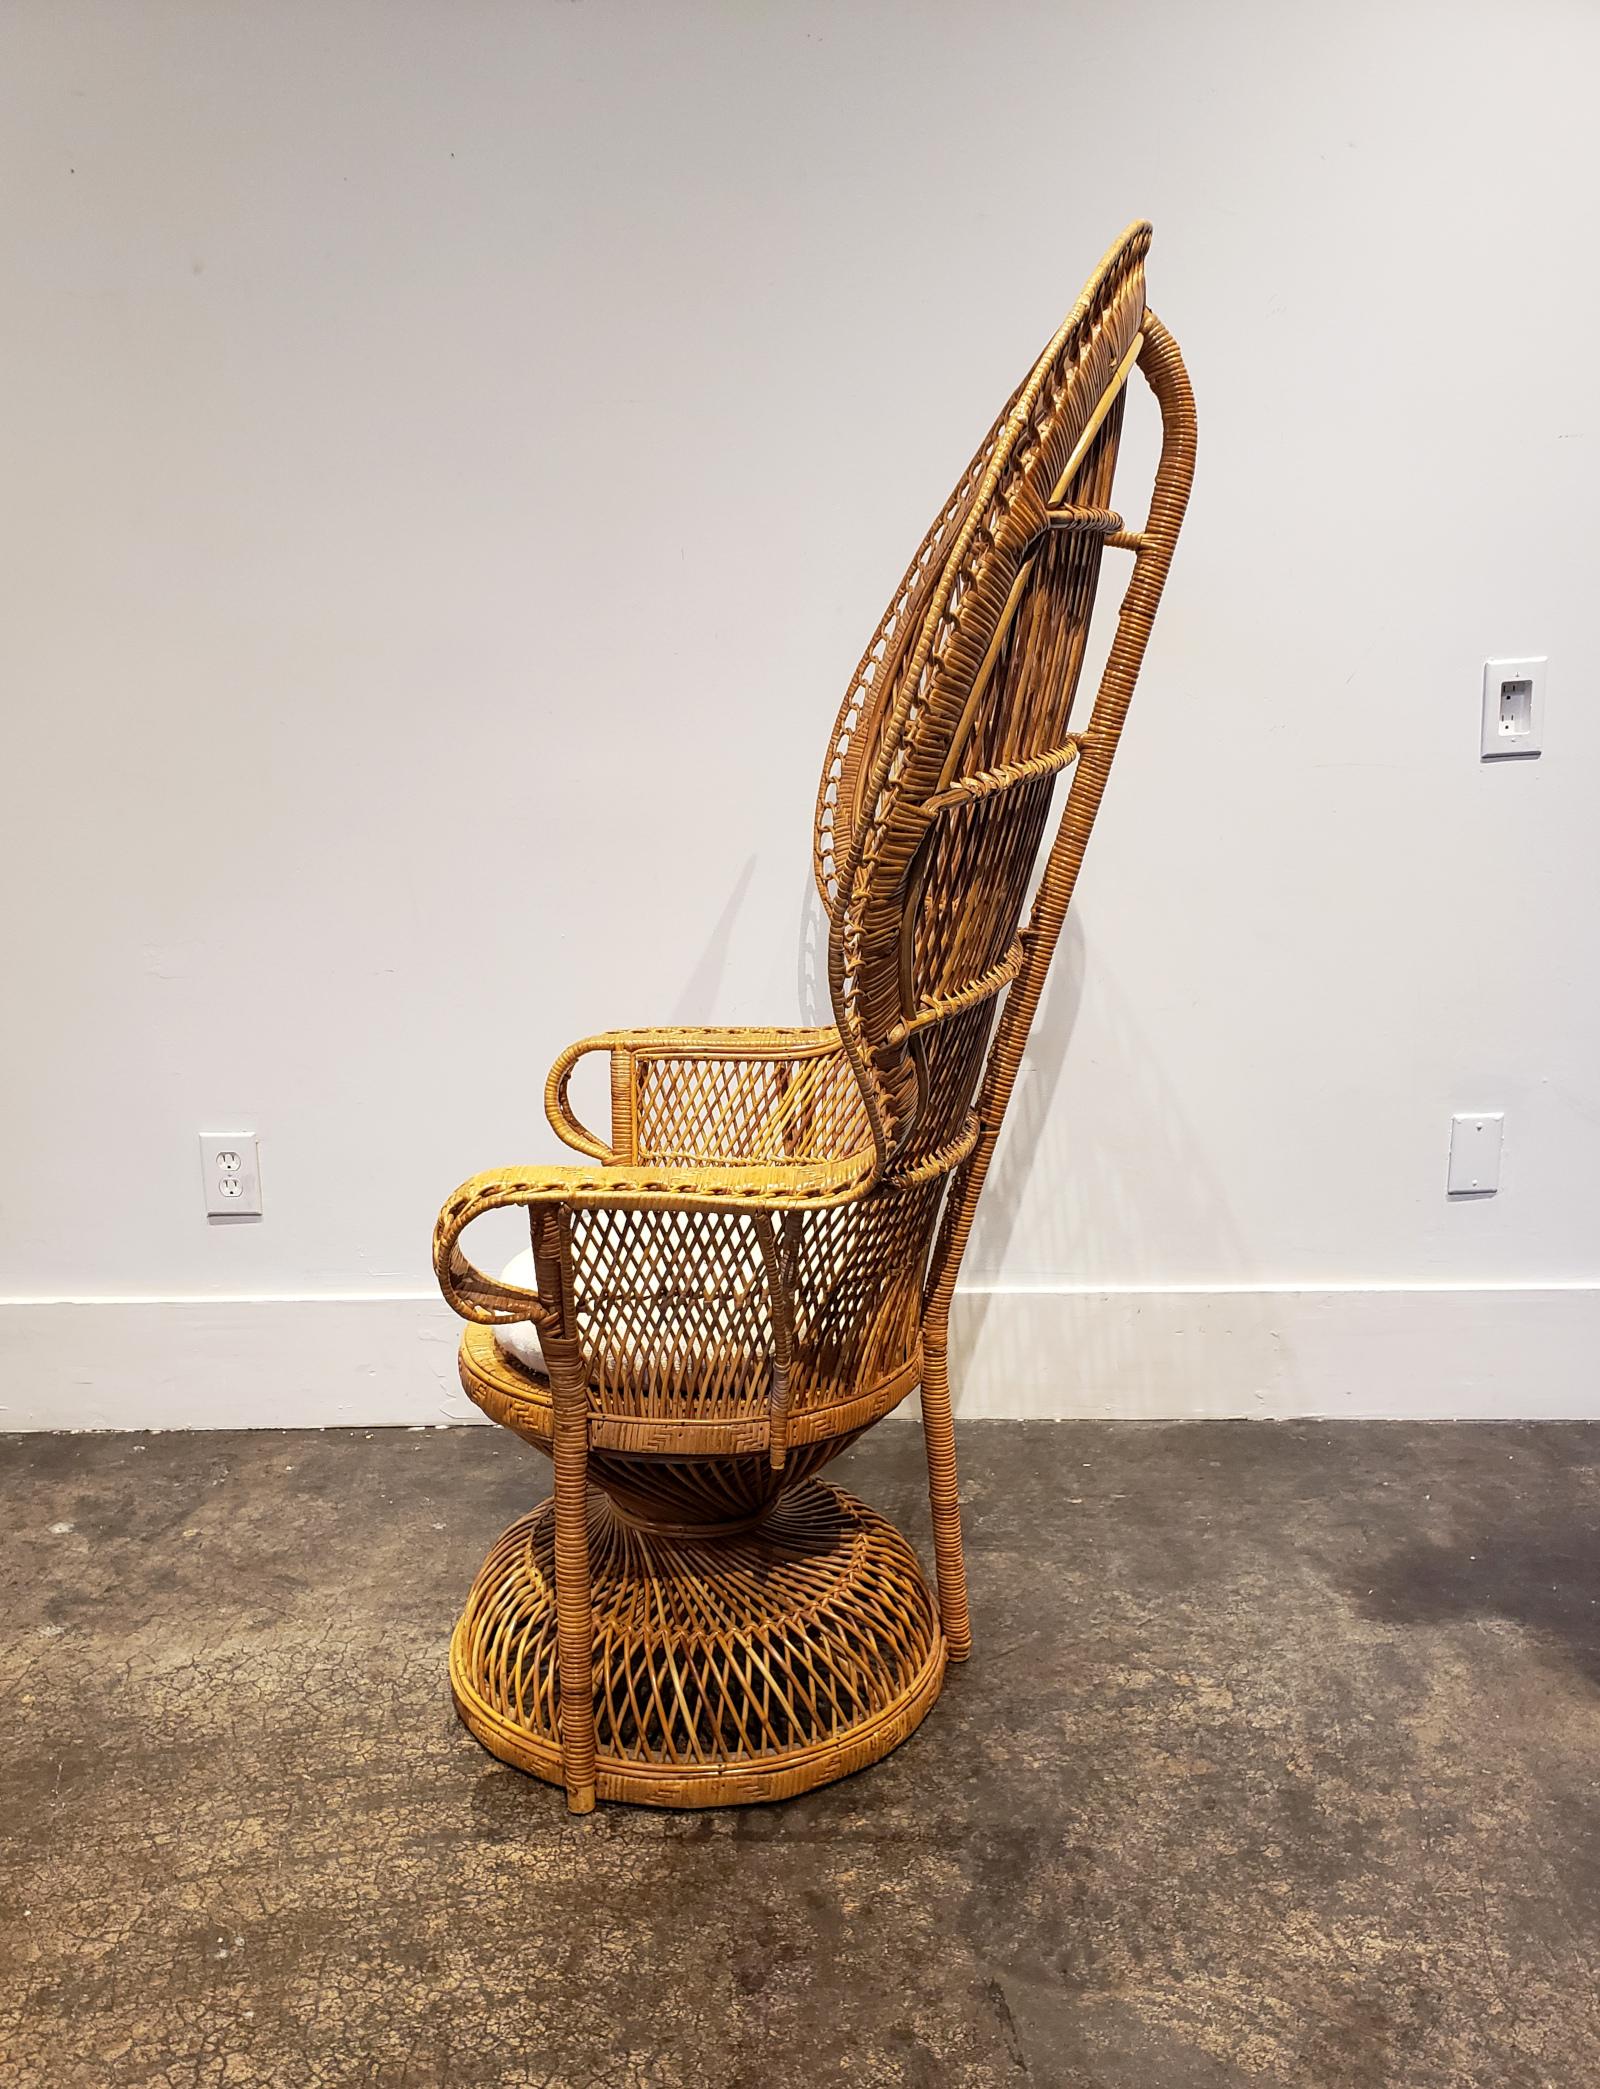 Iconic 1960s-1970s peacock chair made of woven rattan. Comes with comfy home-made white cushion.
  